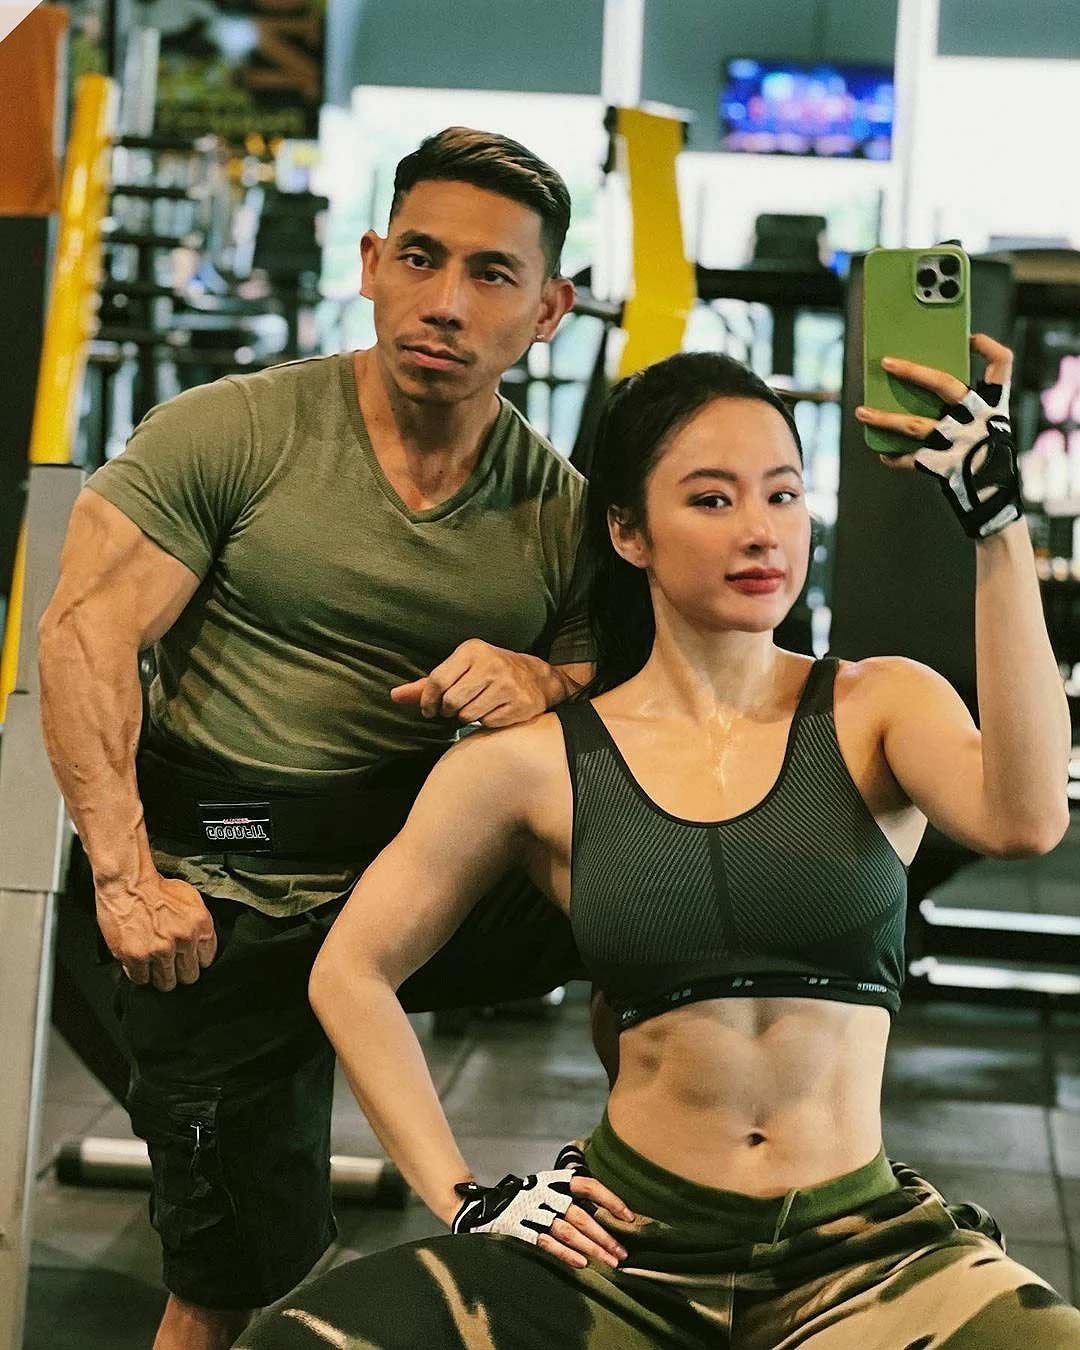 Angela Phuong Trinh lifts weights of nearly 300 kg, her muscular muscles make men " completely out of their mind"  - 5